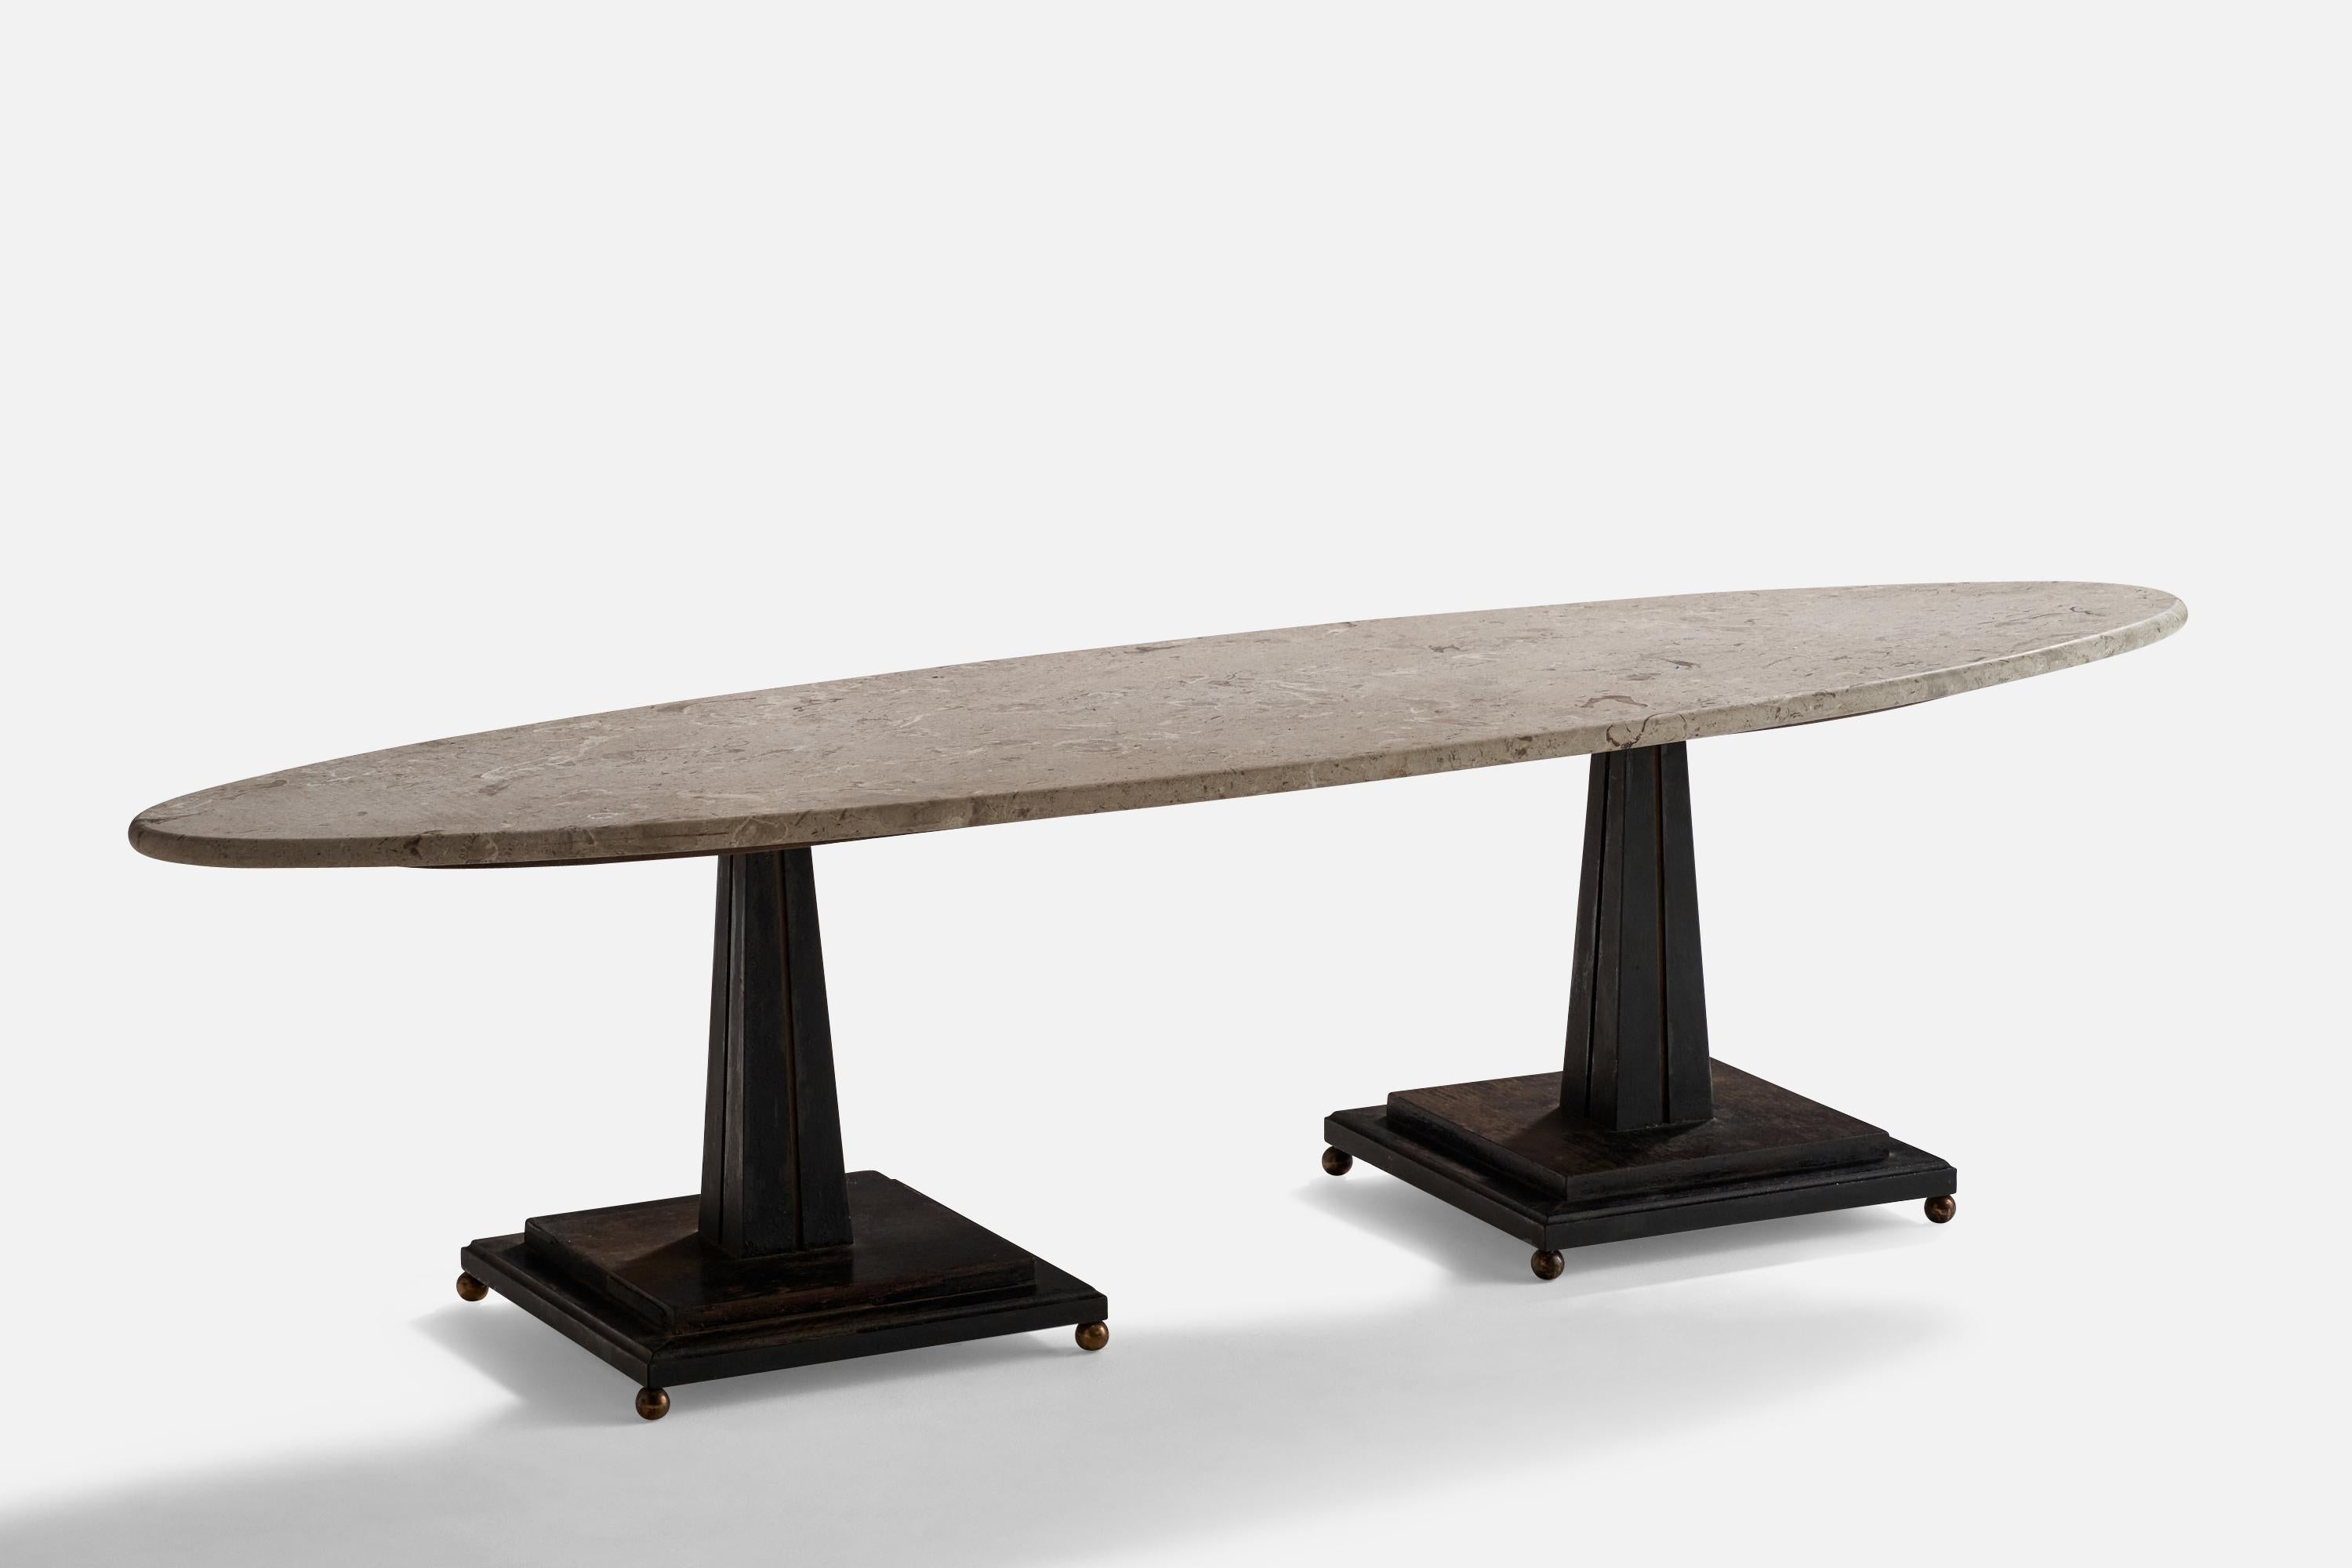 A travertine, dark-stained wood and brass coffee table designed and produced in the US, c. 1940s.